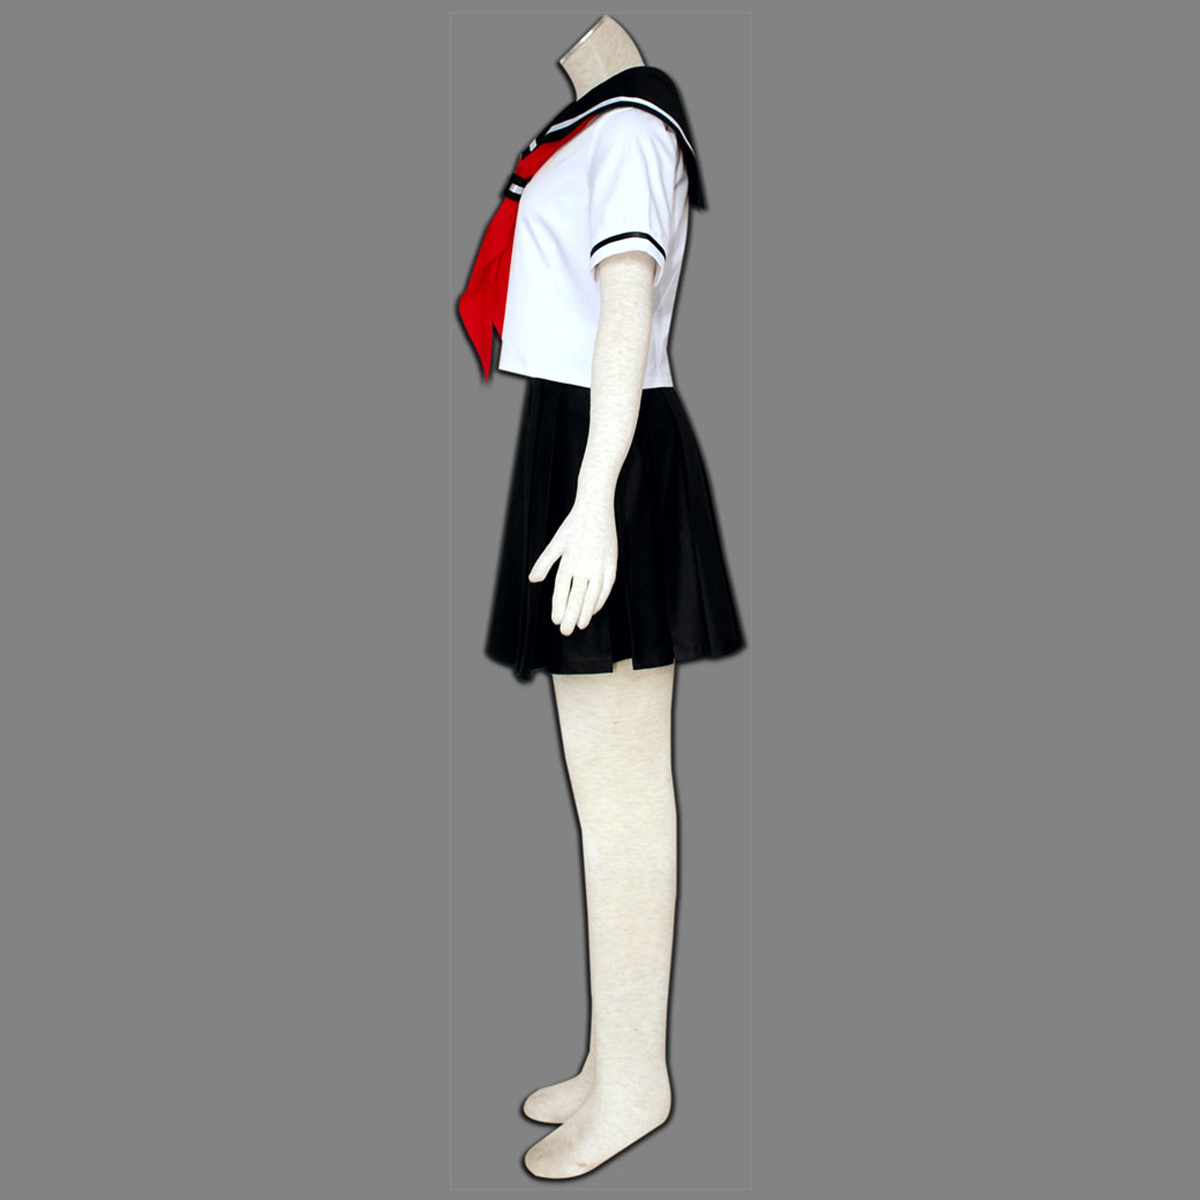 Hell Girl Enma Ai 3 Summer Sailor Cosplay Costumes New Zealand Online Store